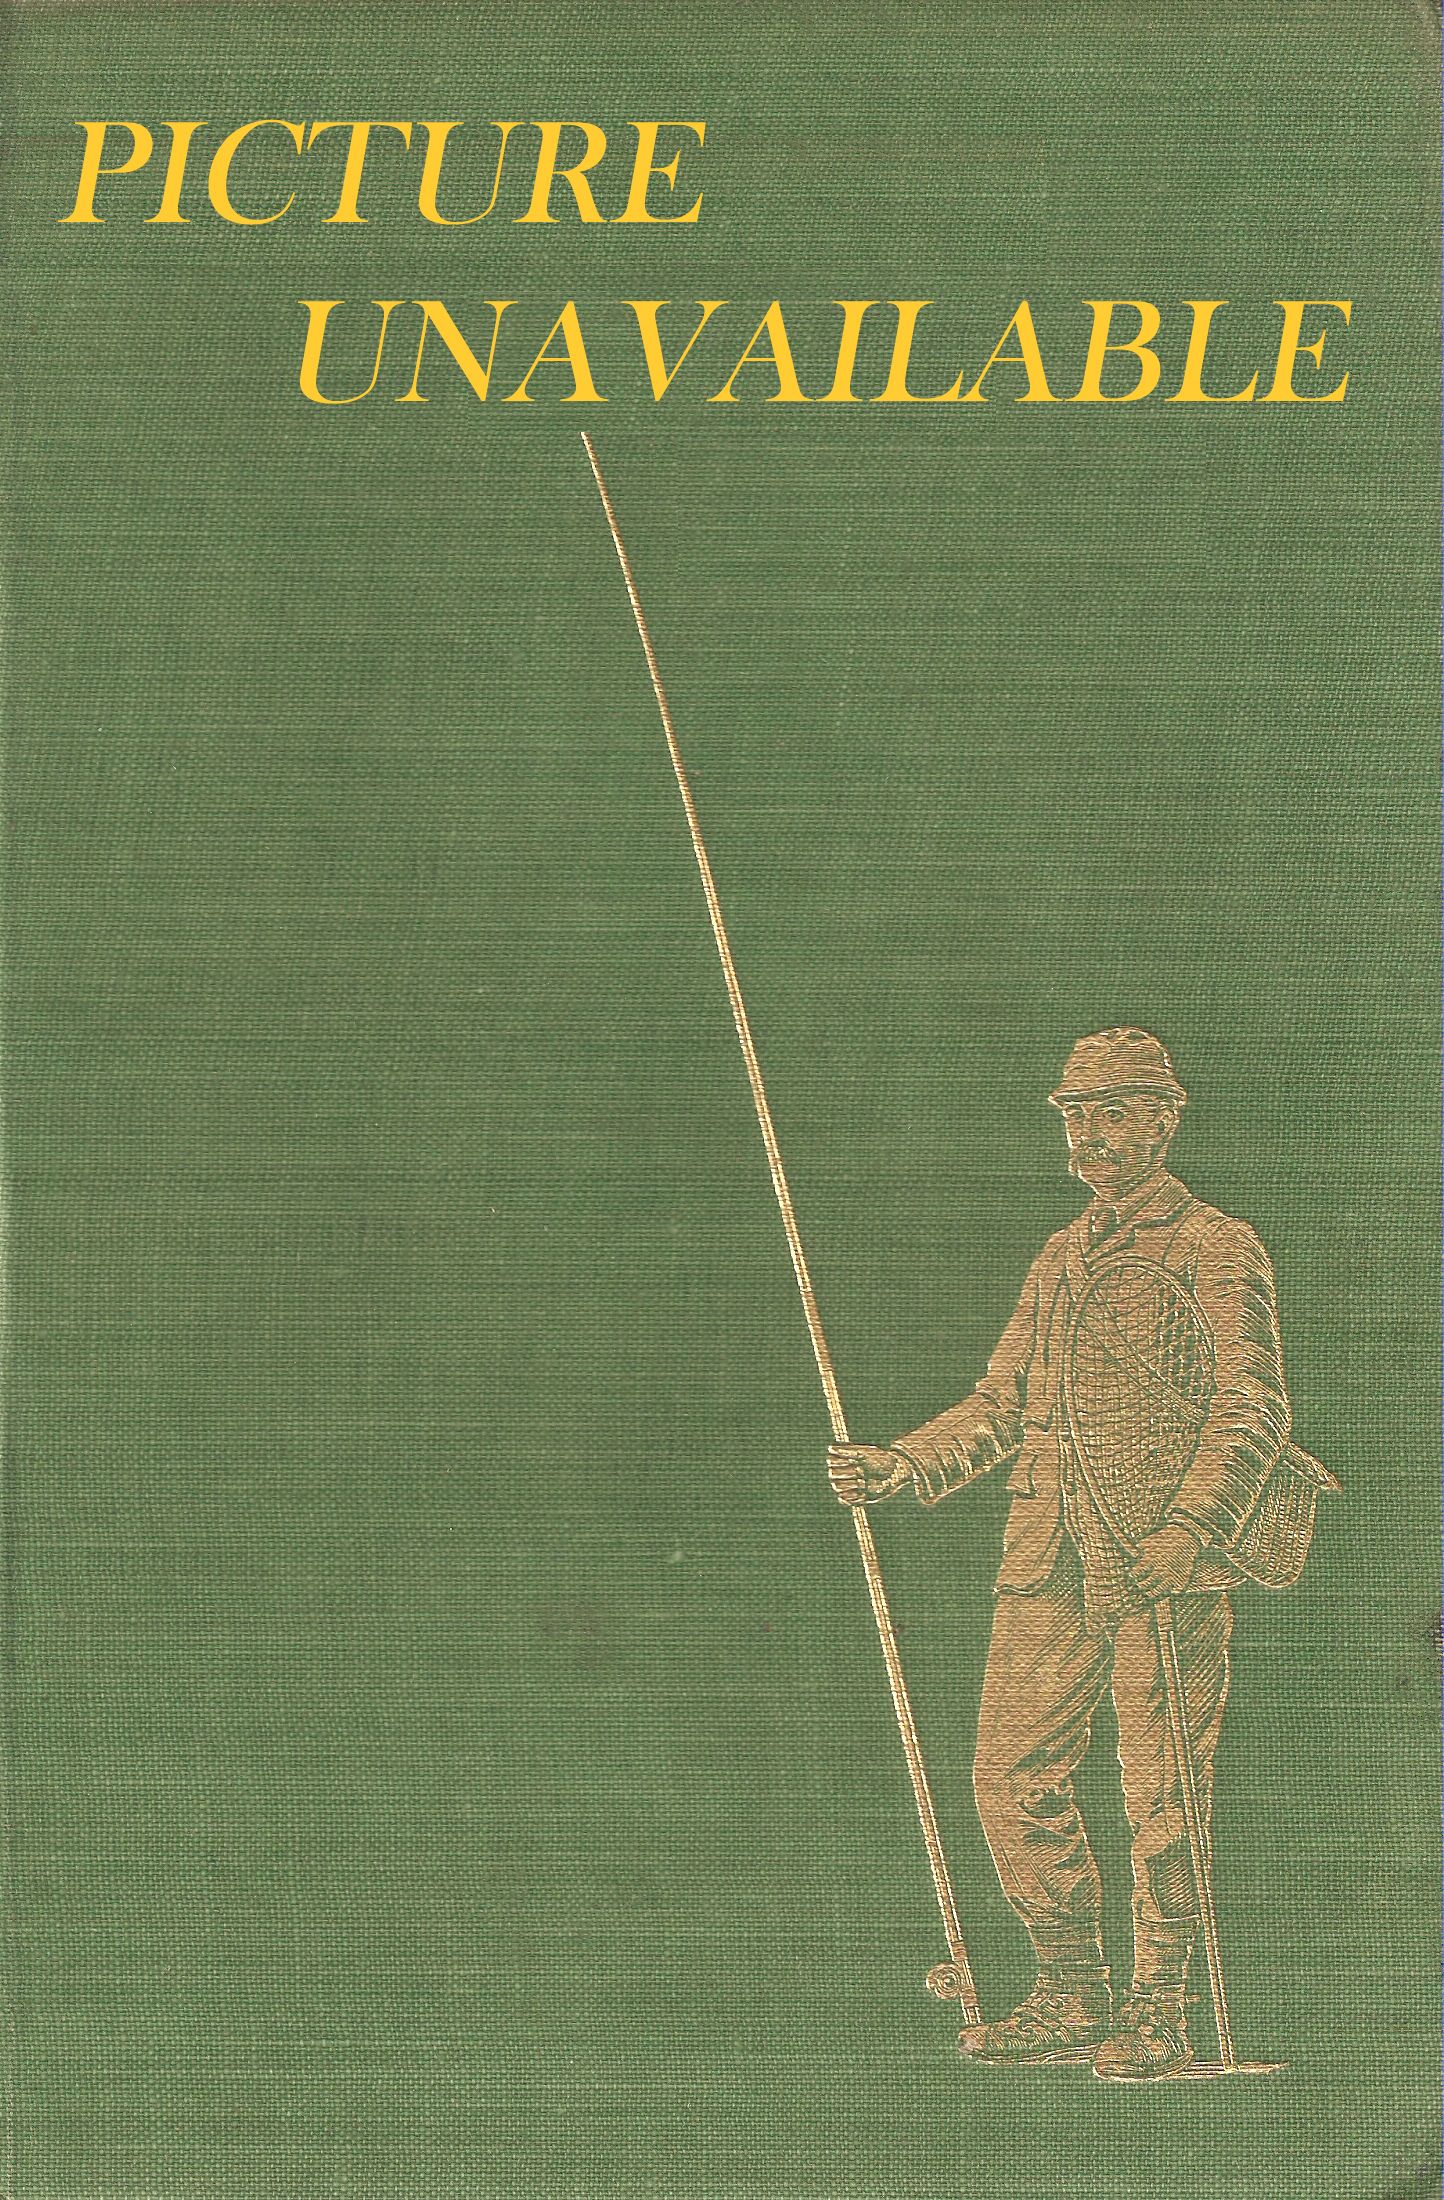 TROUT AND HOW TO CATCH THEM. By L. Baverstock, R.C. Bridgett, Oliver Kite,  Kenneth Mansfield, W.T. Sargeaunt, C.F. Walker. Edited by Kenneth  Mansfield.